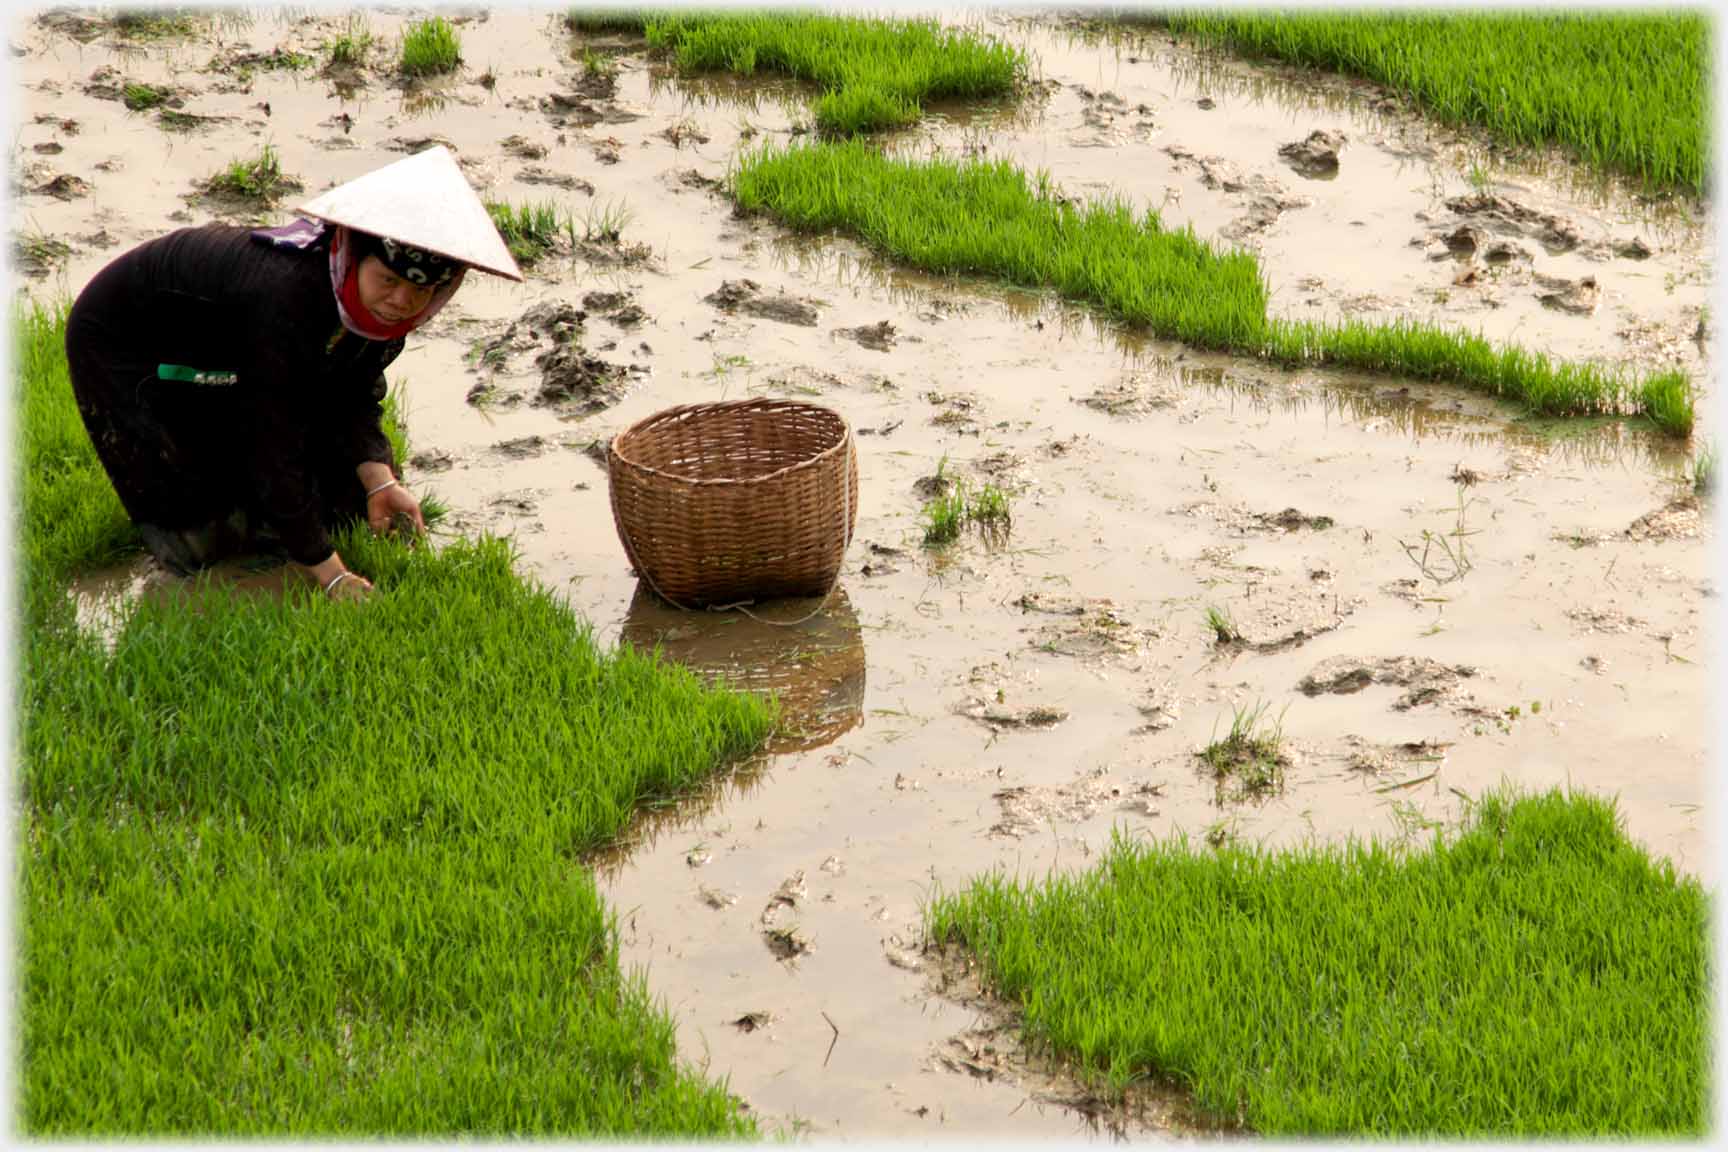 Woman looking up at photographer as she plucks handfuls of paddy.